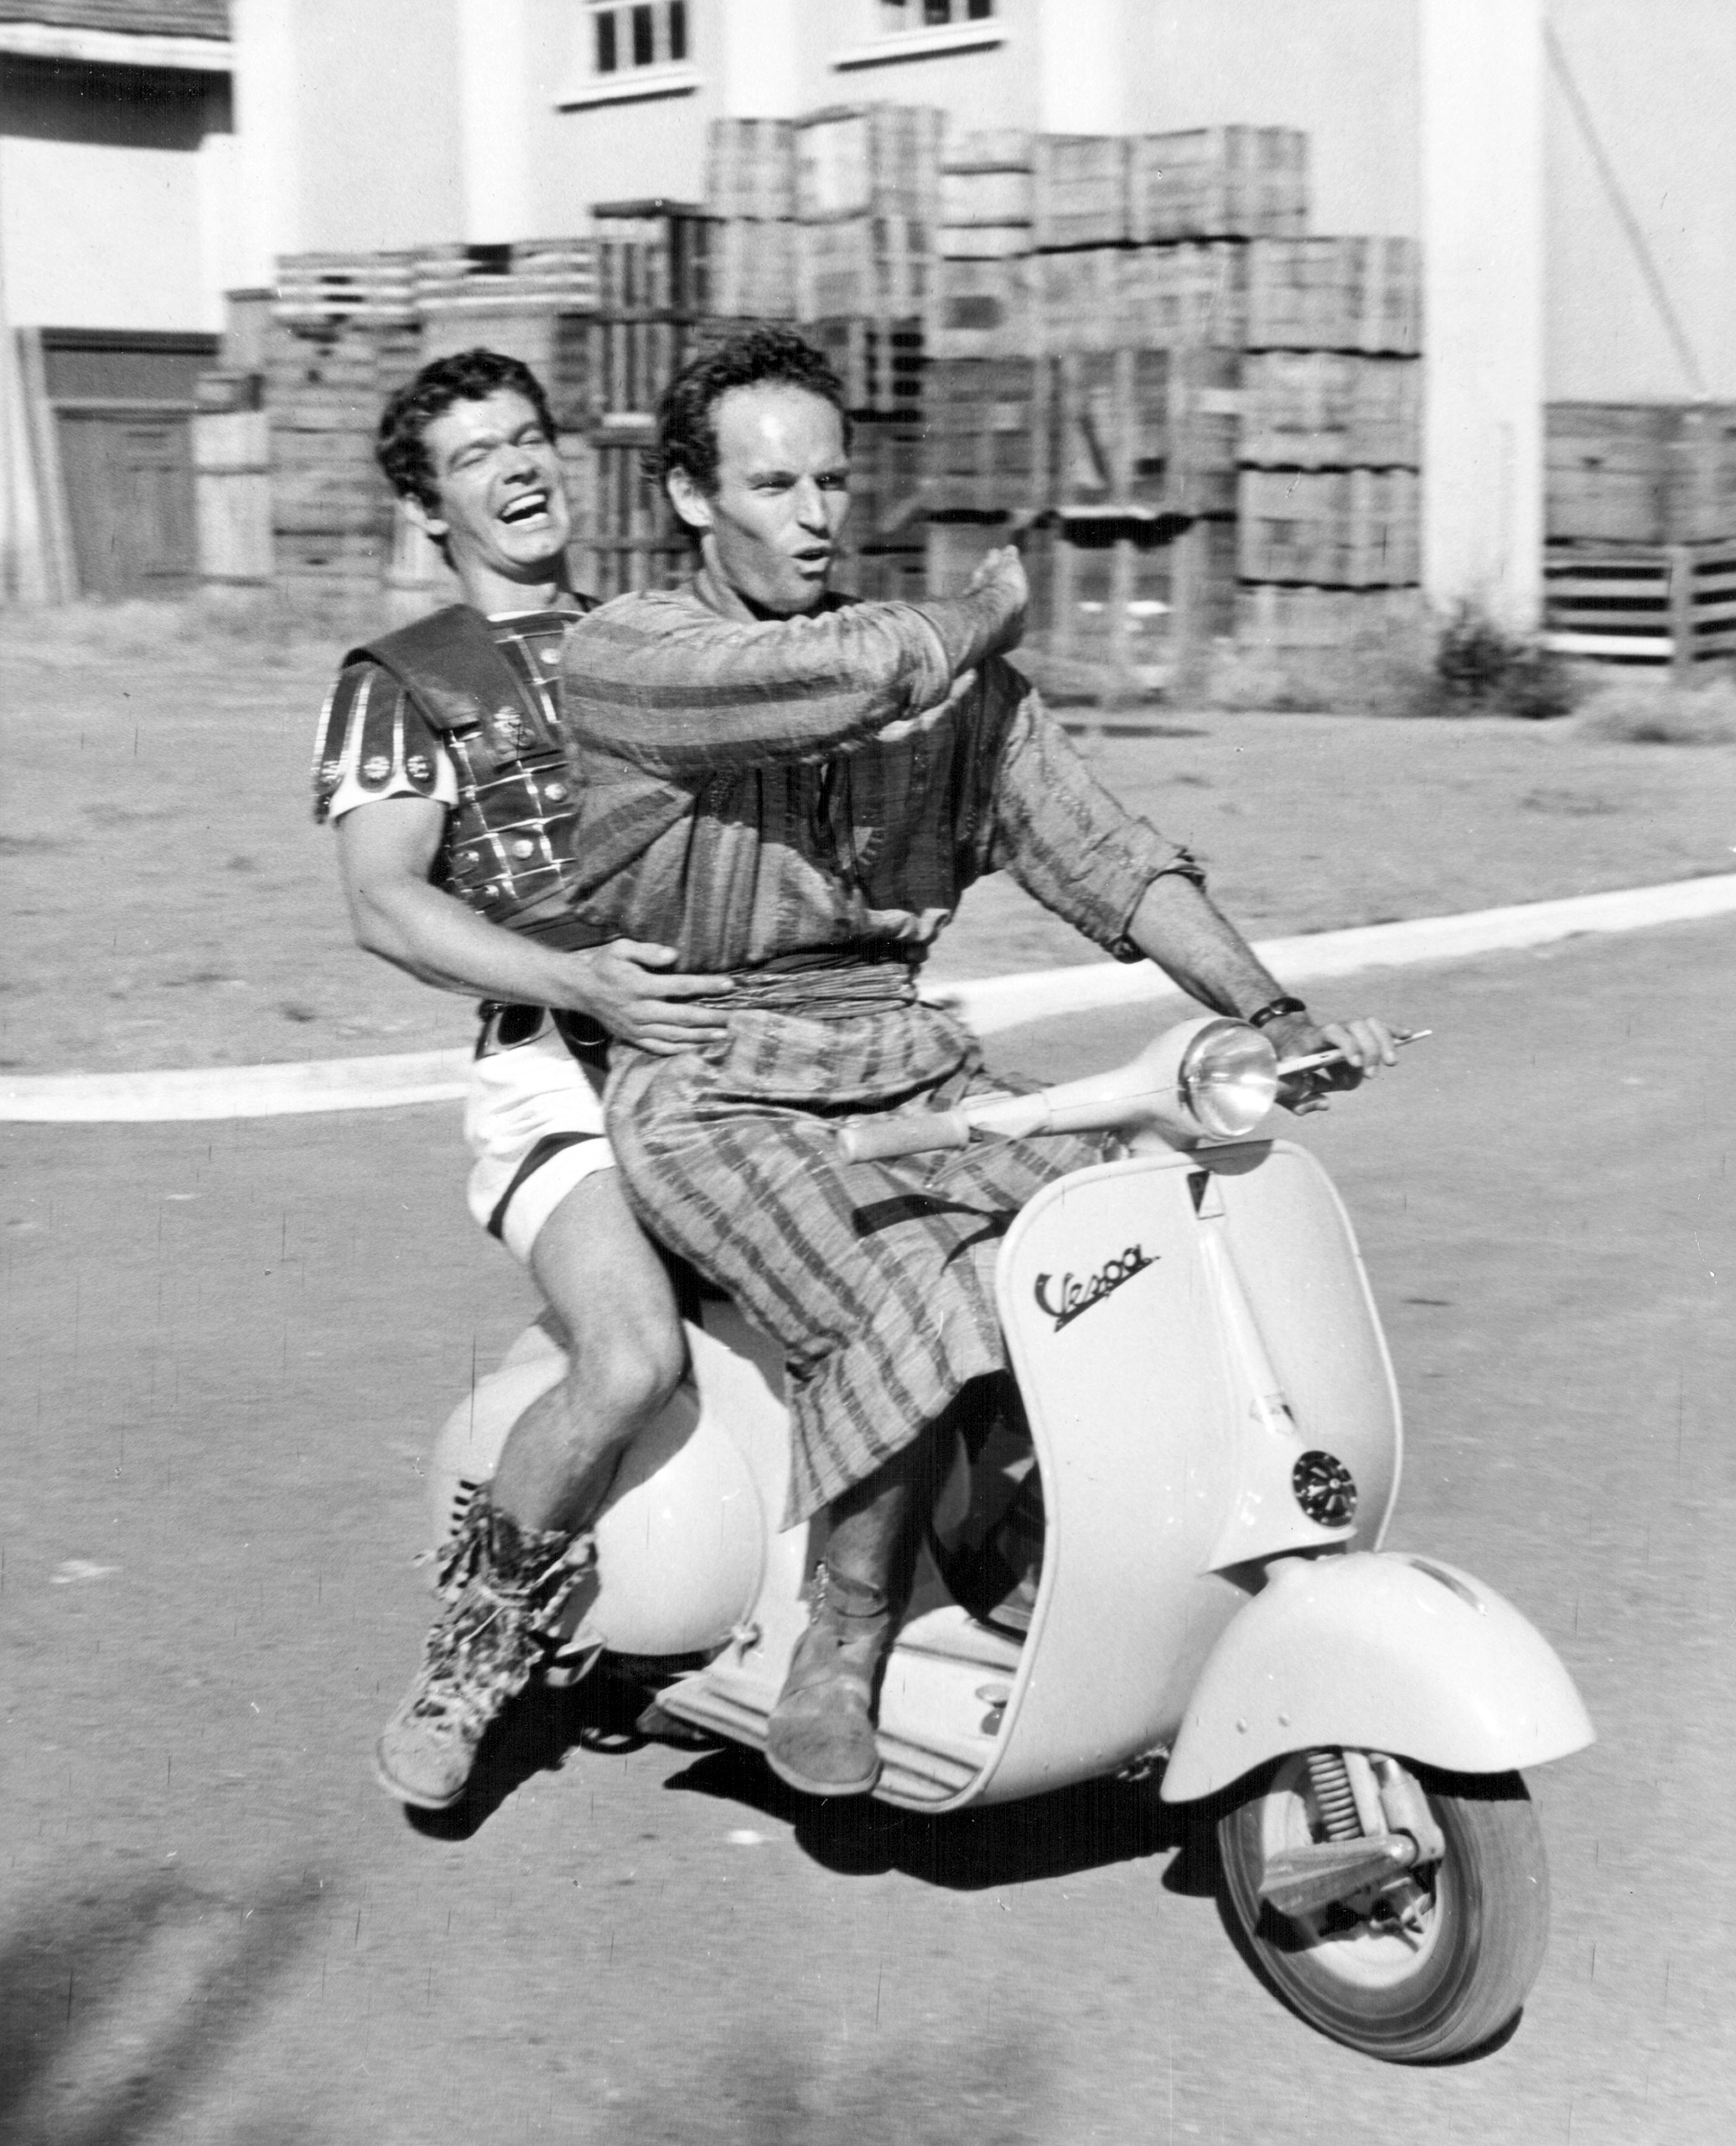 Stephen Boyd and Charlton Heston behind the scenes at Cinecitta Studios in Rome, as they appear in the movie Ben-Hur, 1959.